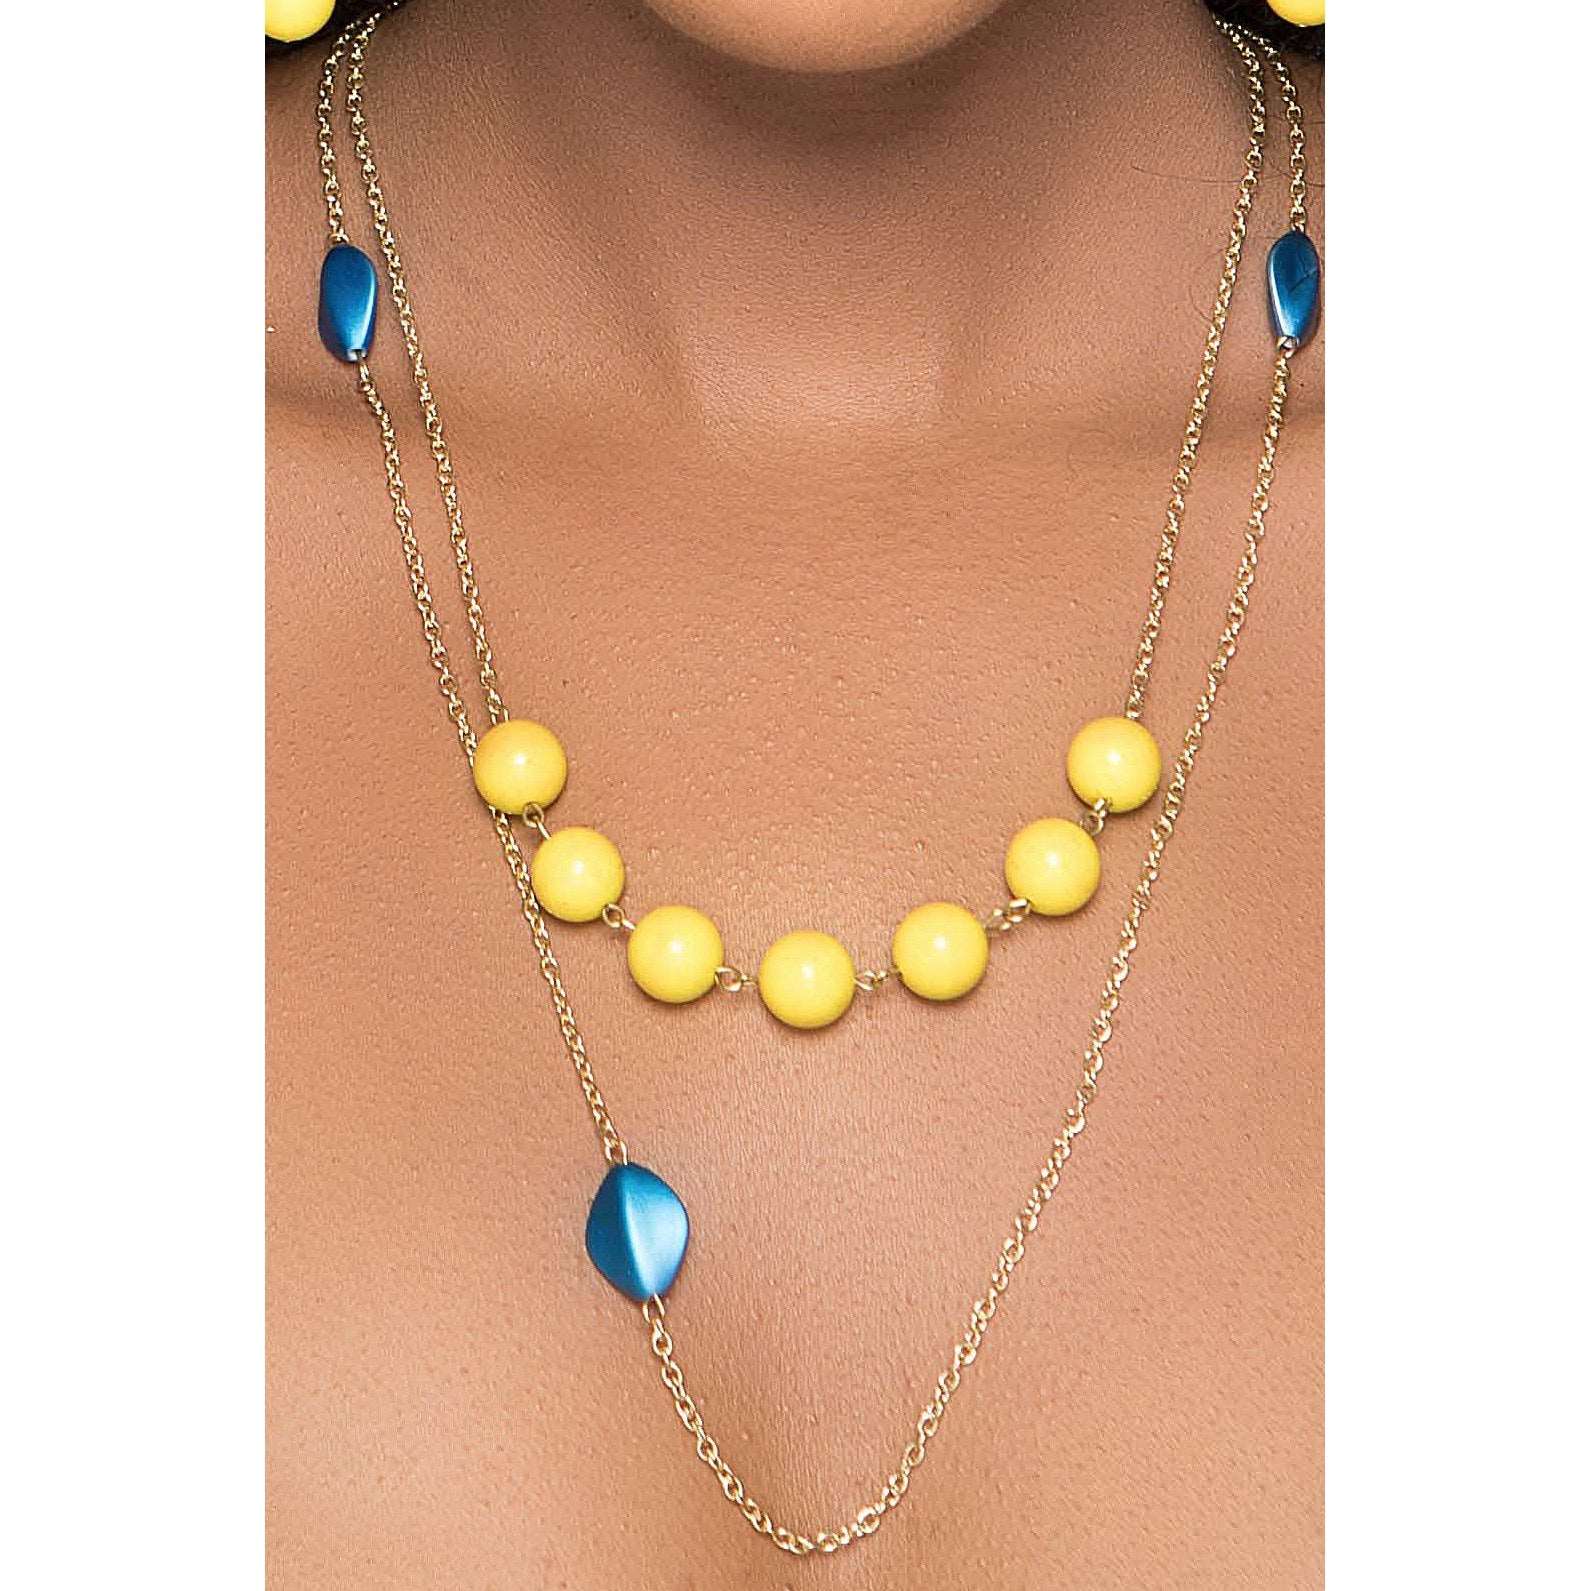 Charisma - sassycollection.net, sassycollection.net-The Sassy Collection, necklace jewelry